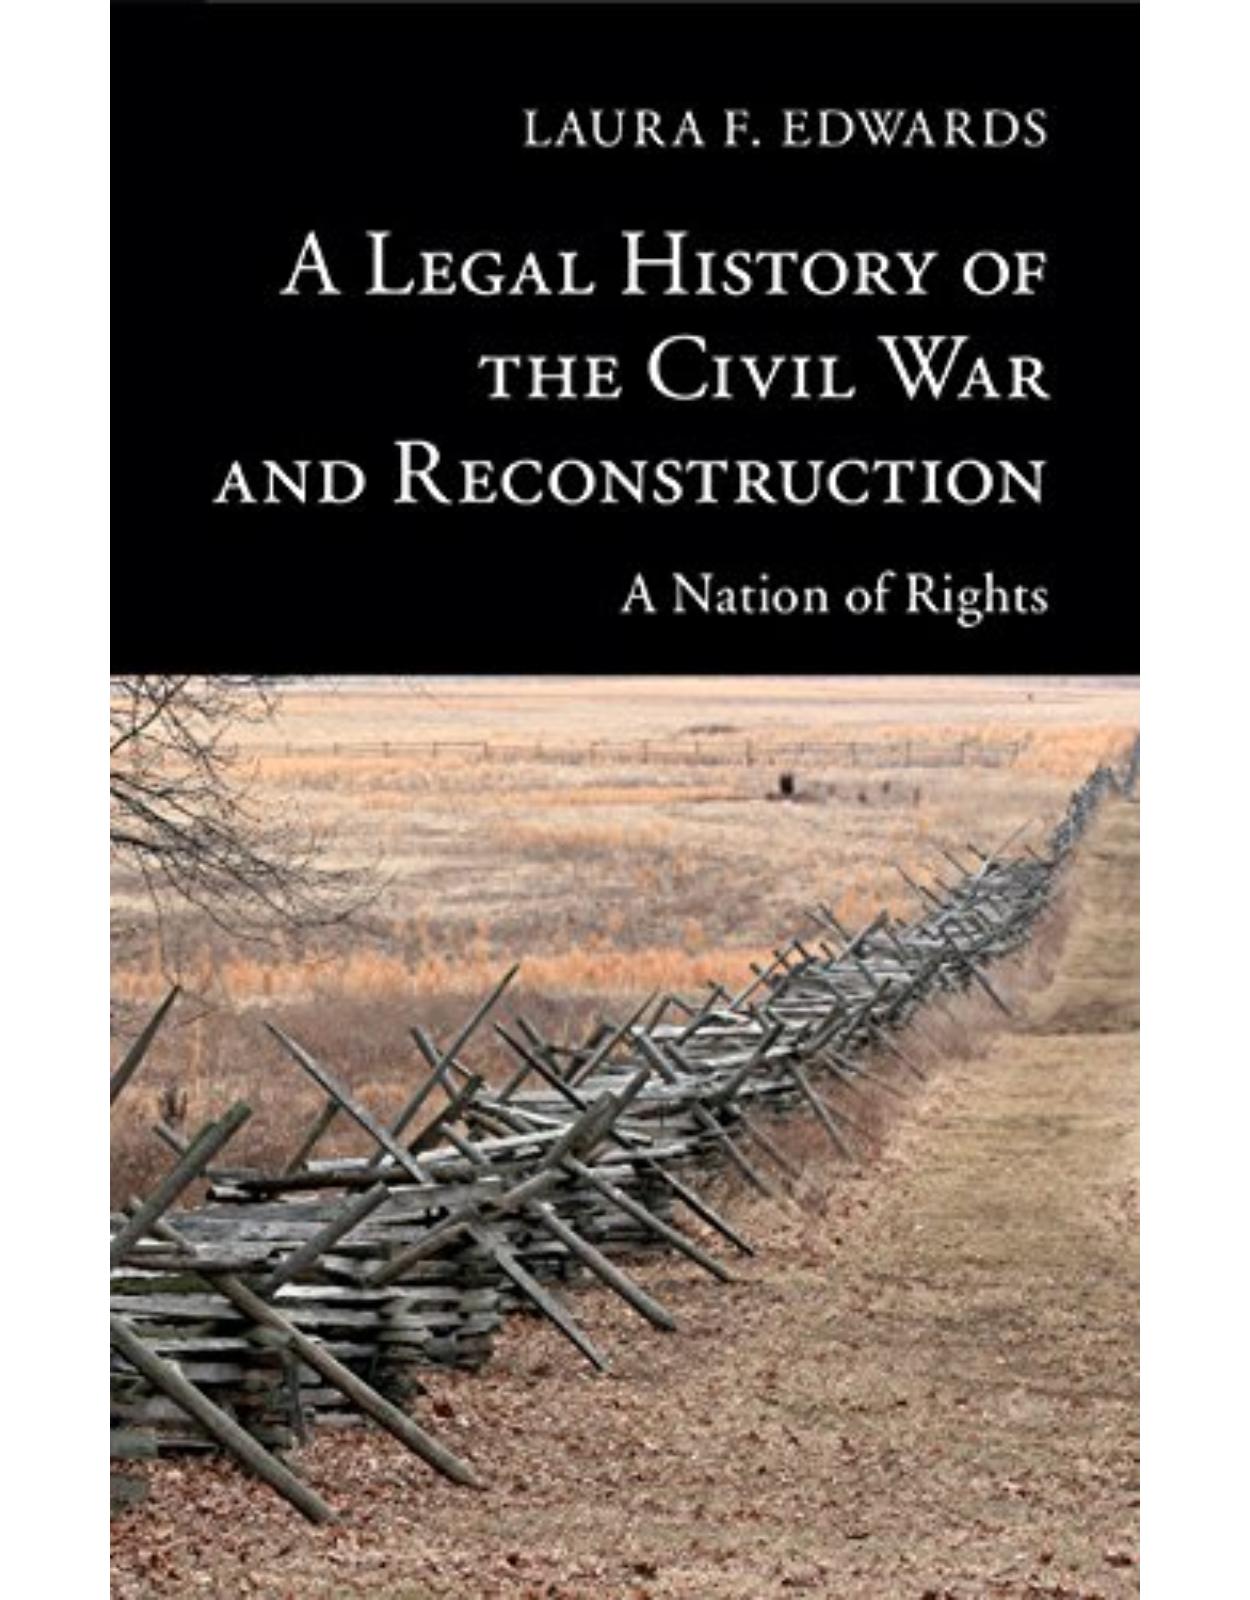 A Legal History of the Civil War and Reconstruction: A Nation of Rights (New Histories of American Law)